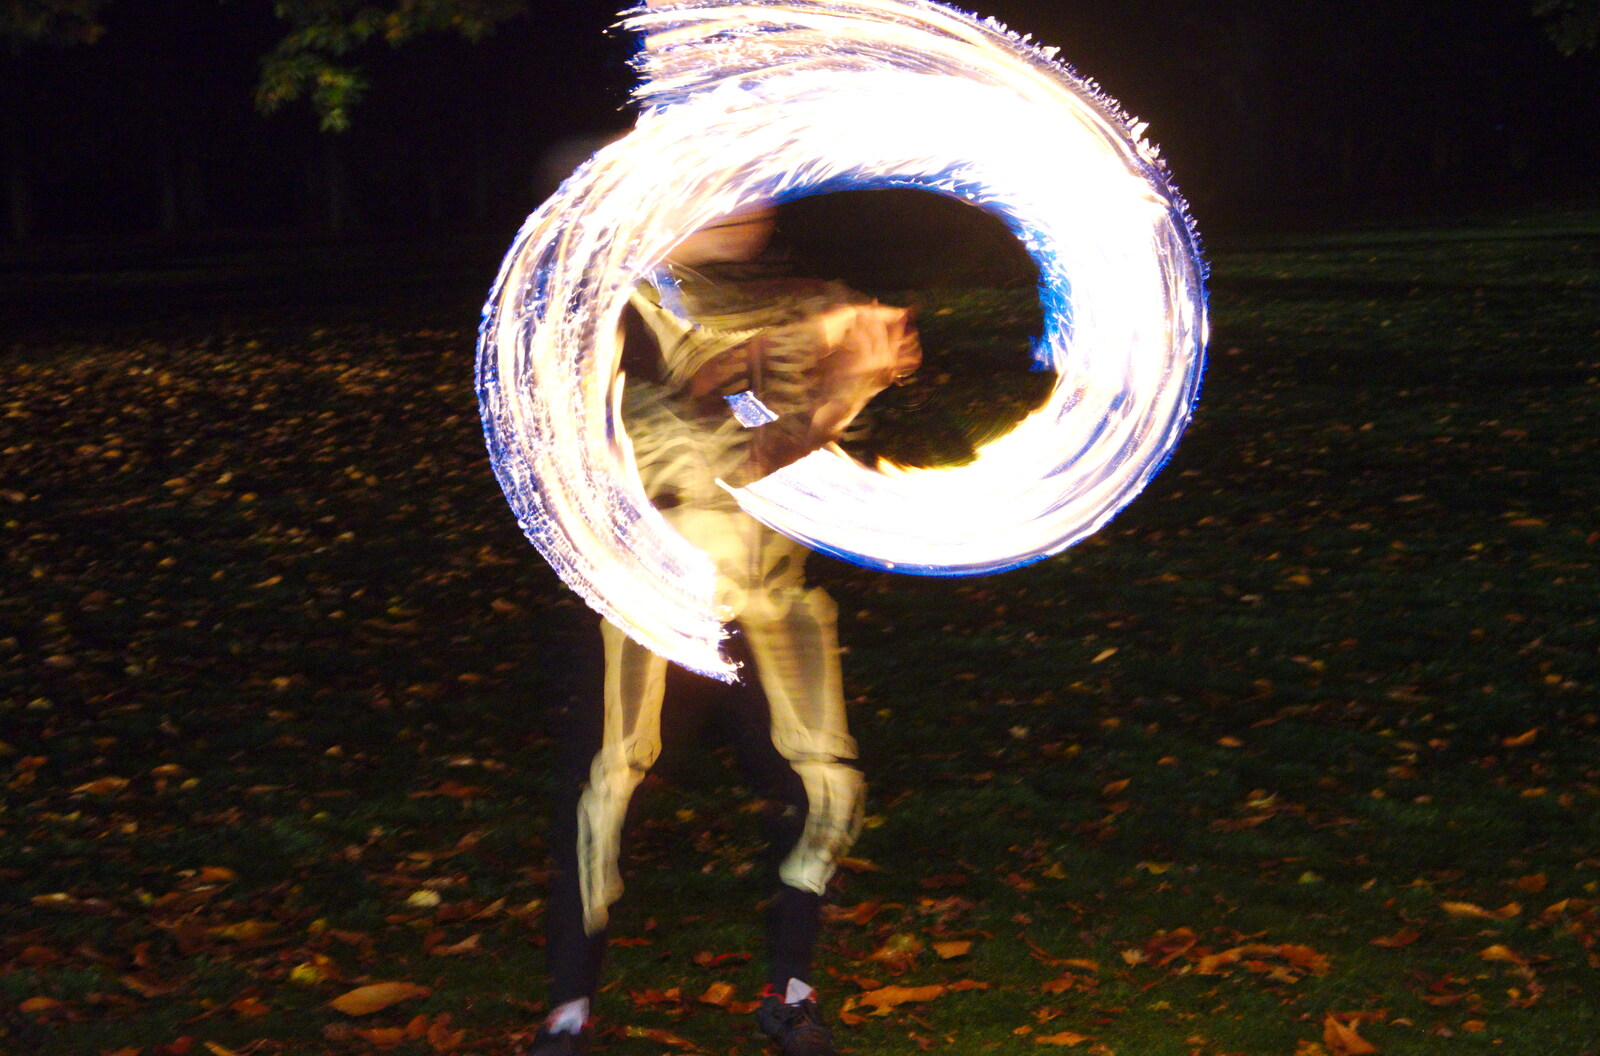 Individual flames look frozen in time from Day of the Dead Party at the Oaksmere, Brome, Suffolk - 2nd November 2019